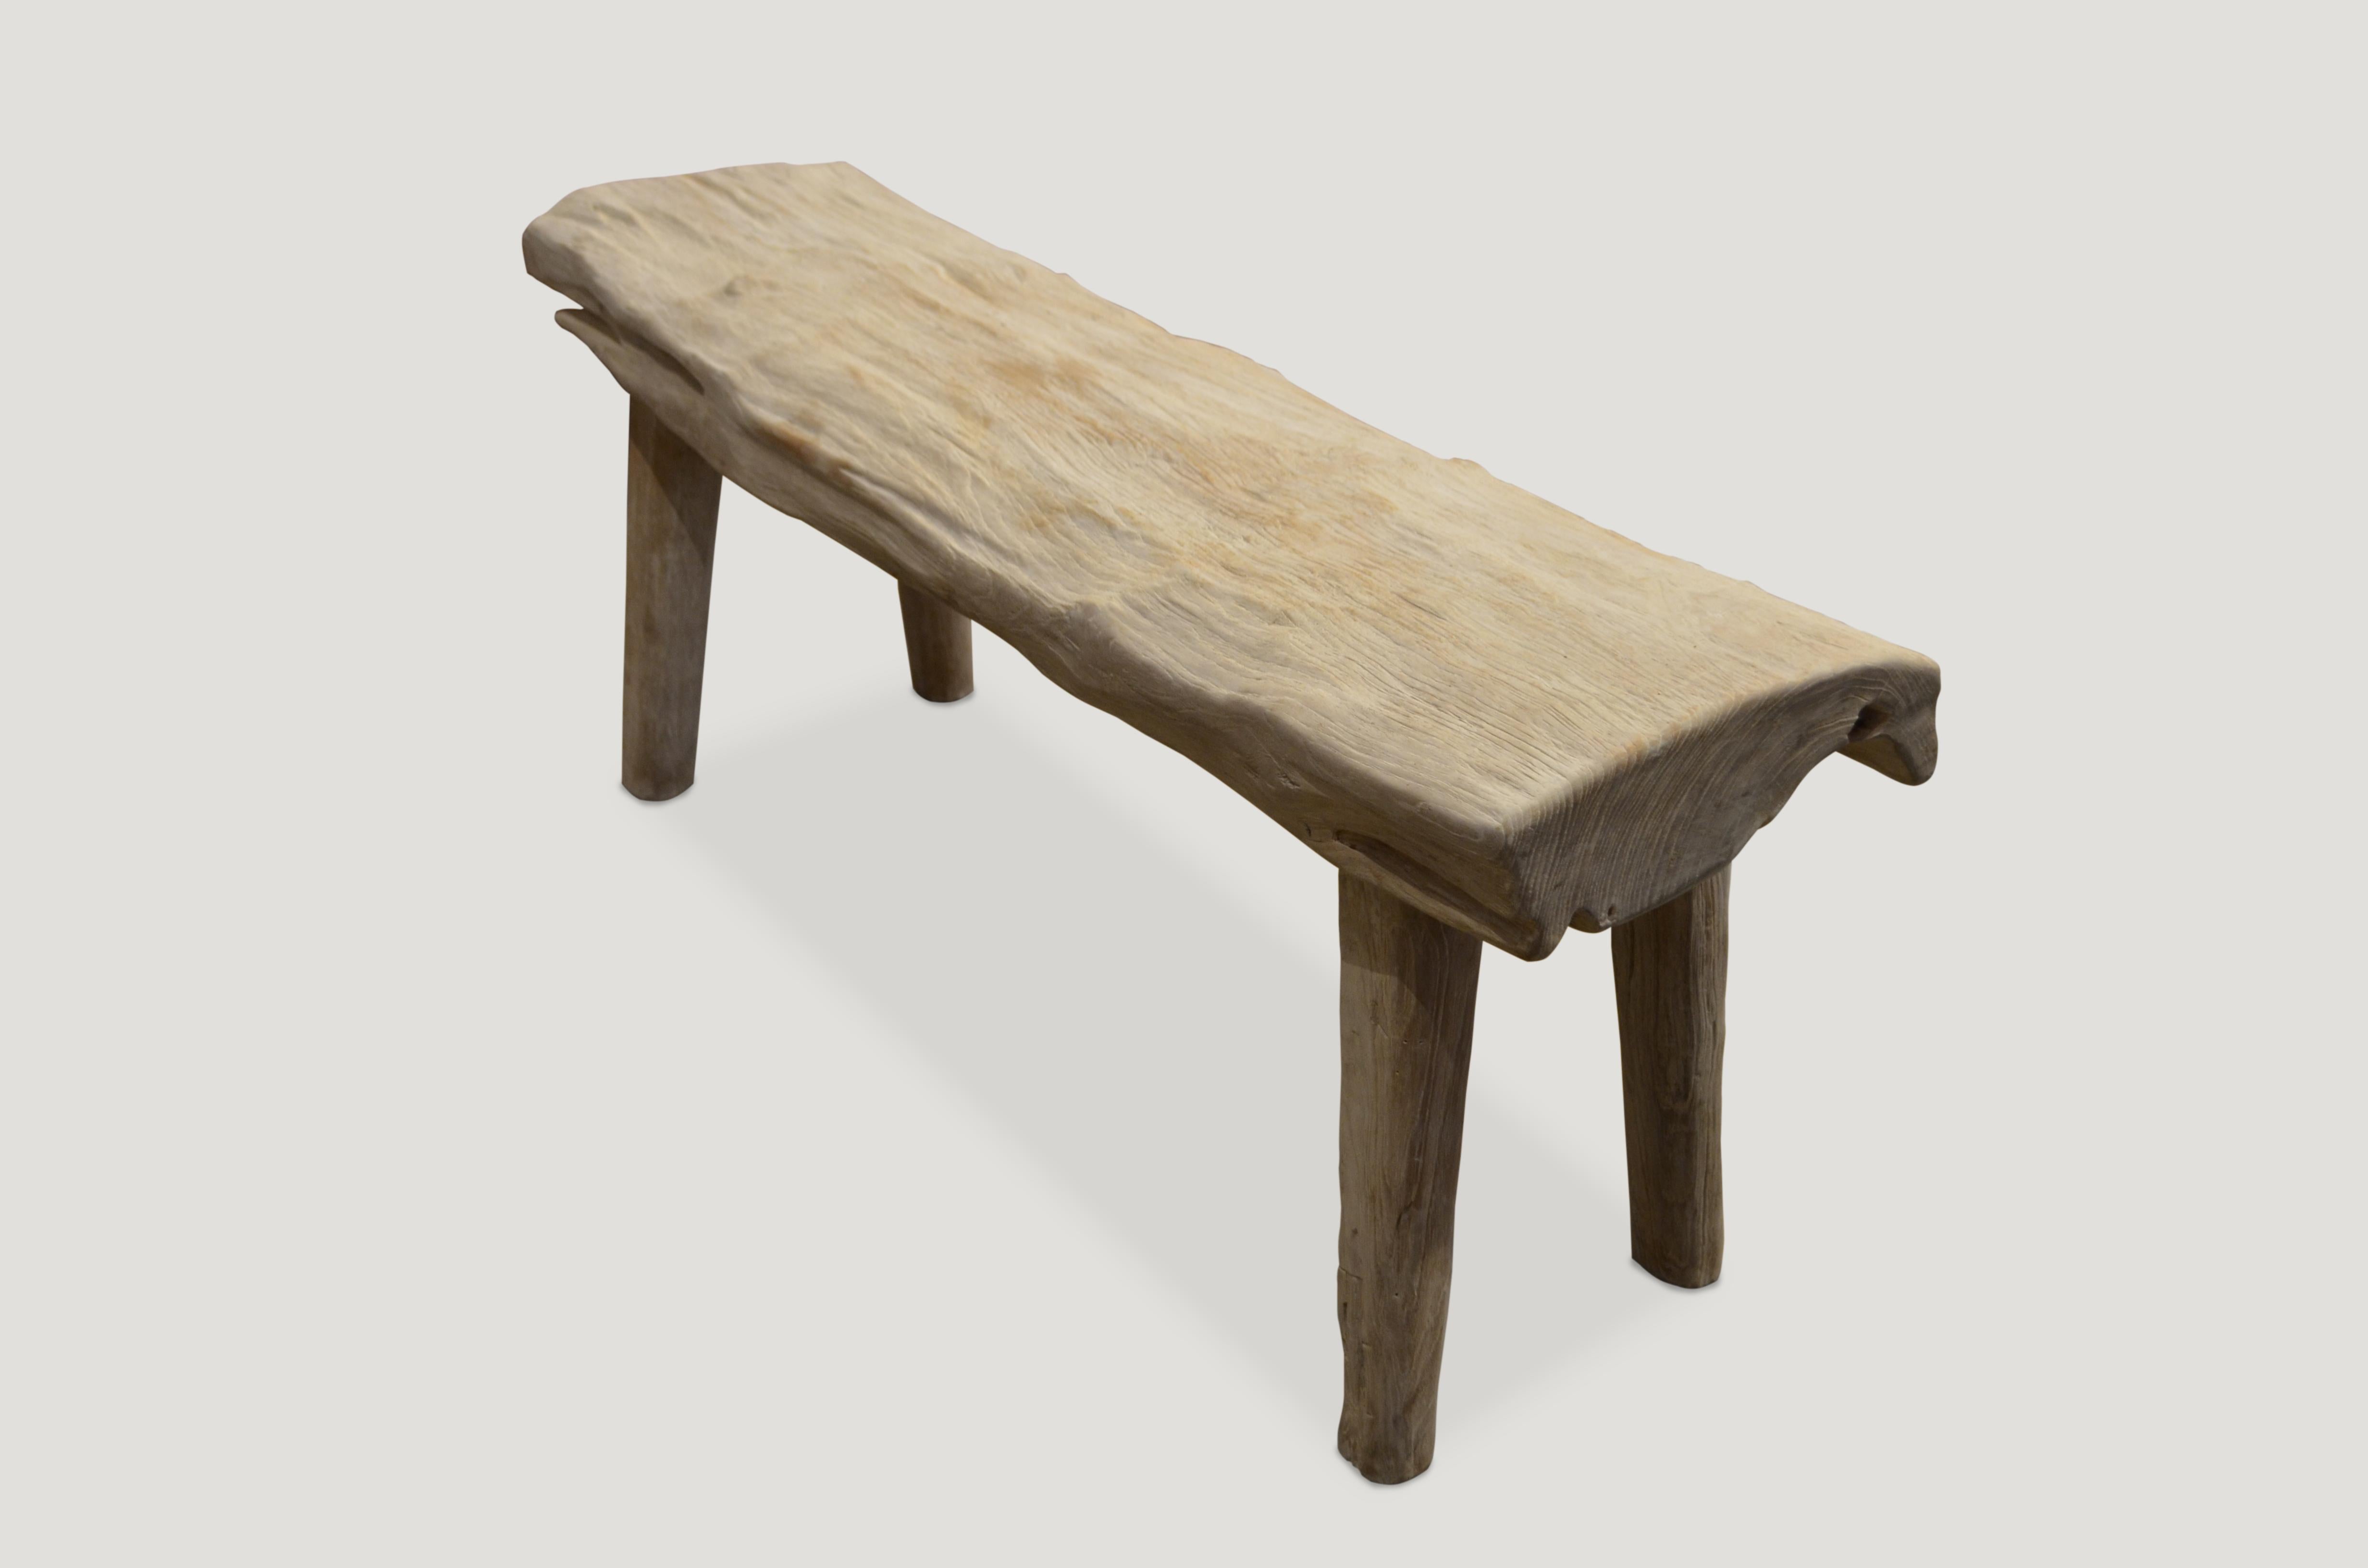 Bleached teak wood 4” slab bench with a white washed finish. Perfect for inside or outside living.

The St. Barts collection features an exciting new line of organic white wash and natural weathered bleached teak furniture. The reclaimed teak is